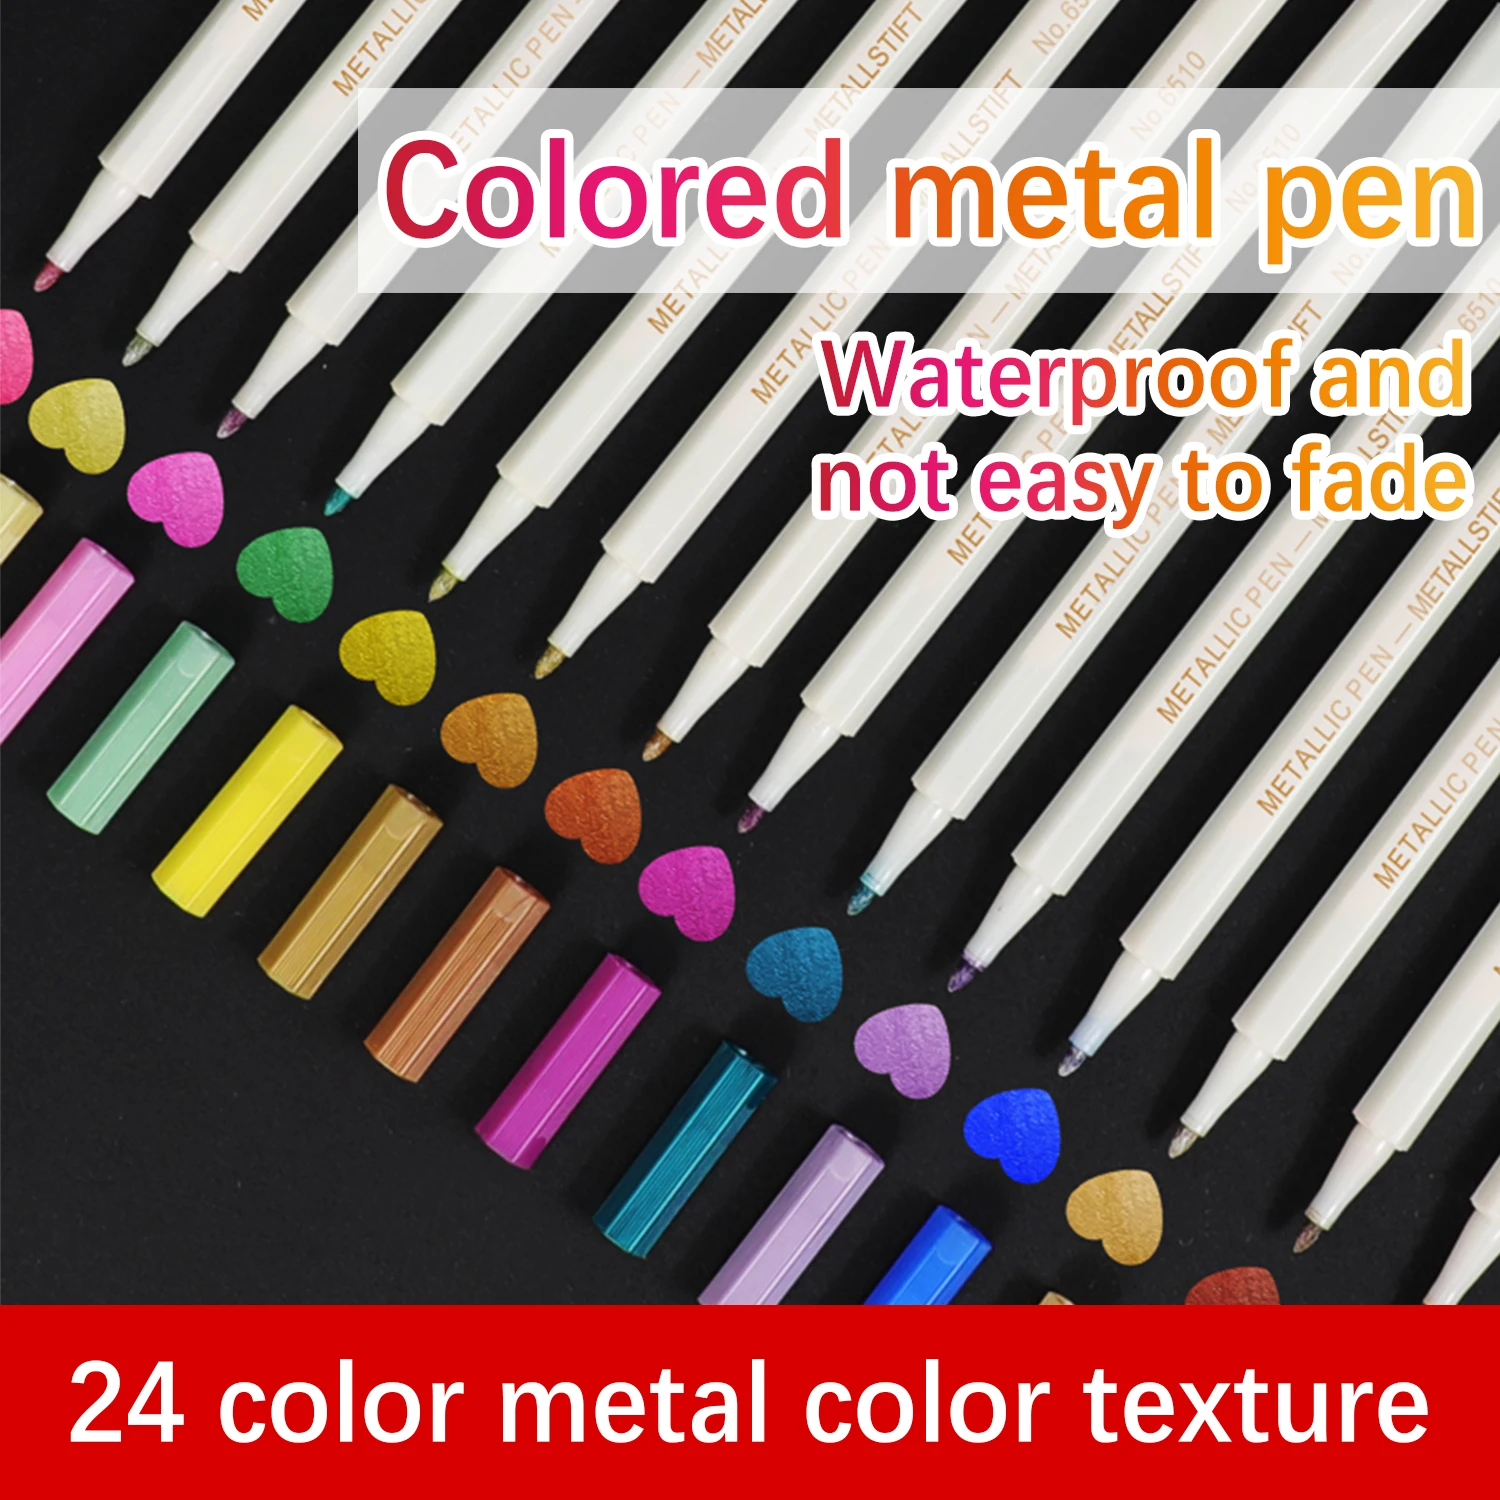 24 Colors Paintbrush Paint Pens Acrylic Brush Marker Pens for Rock Painting Stone Ceramic Glass Wood Canvas DIY Card Making 100x70mm magnetic advertising sign card display stand wood acrylic table desk menu price label holder tags